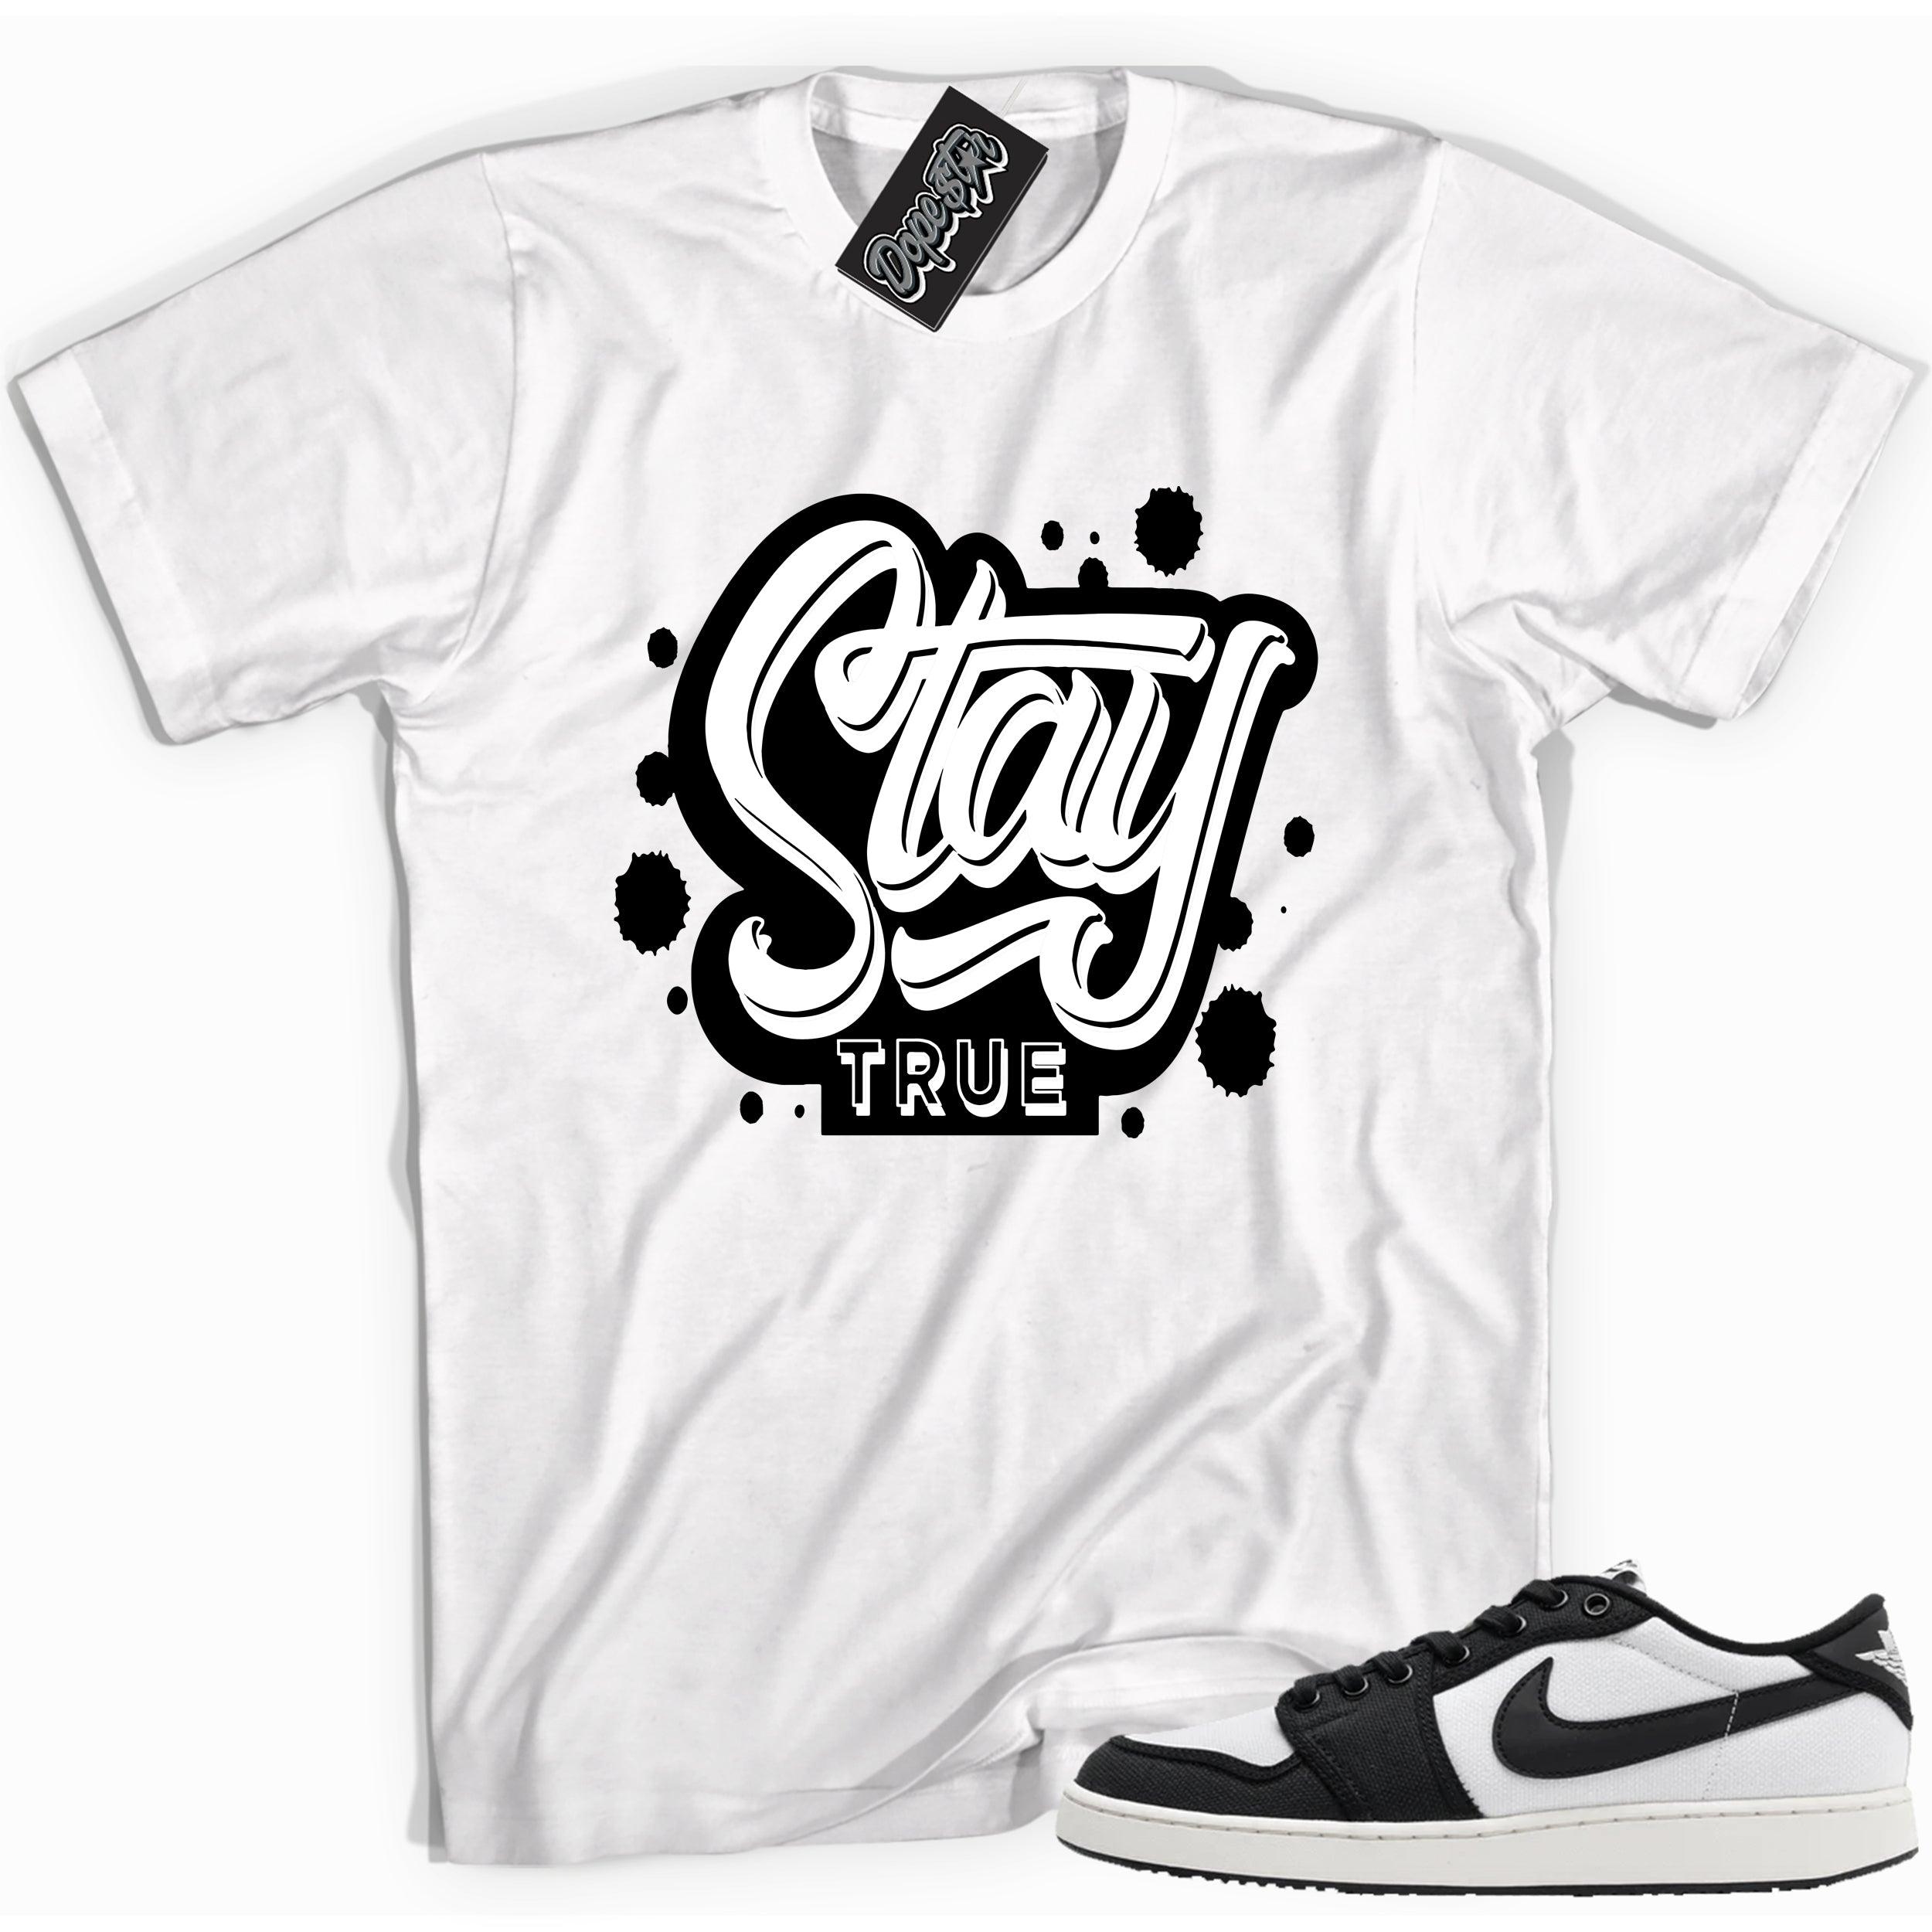 Cool white graphic tee with 'stay true' print, that perfectly matches Air Jordan 1 Retro Ajko Low Black & White sneakers.